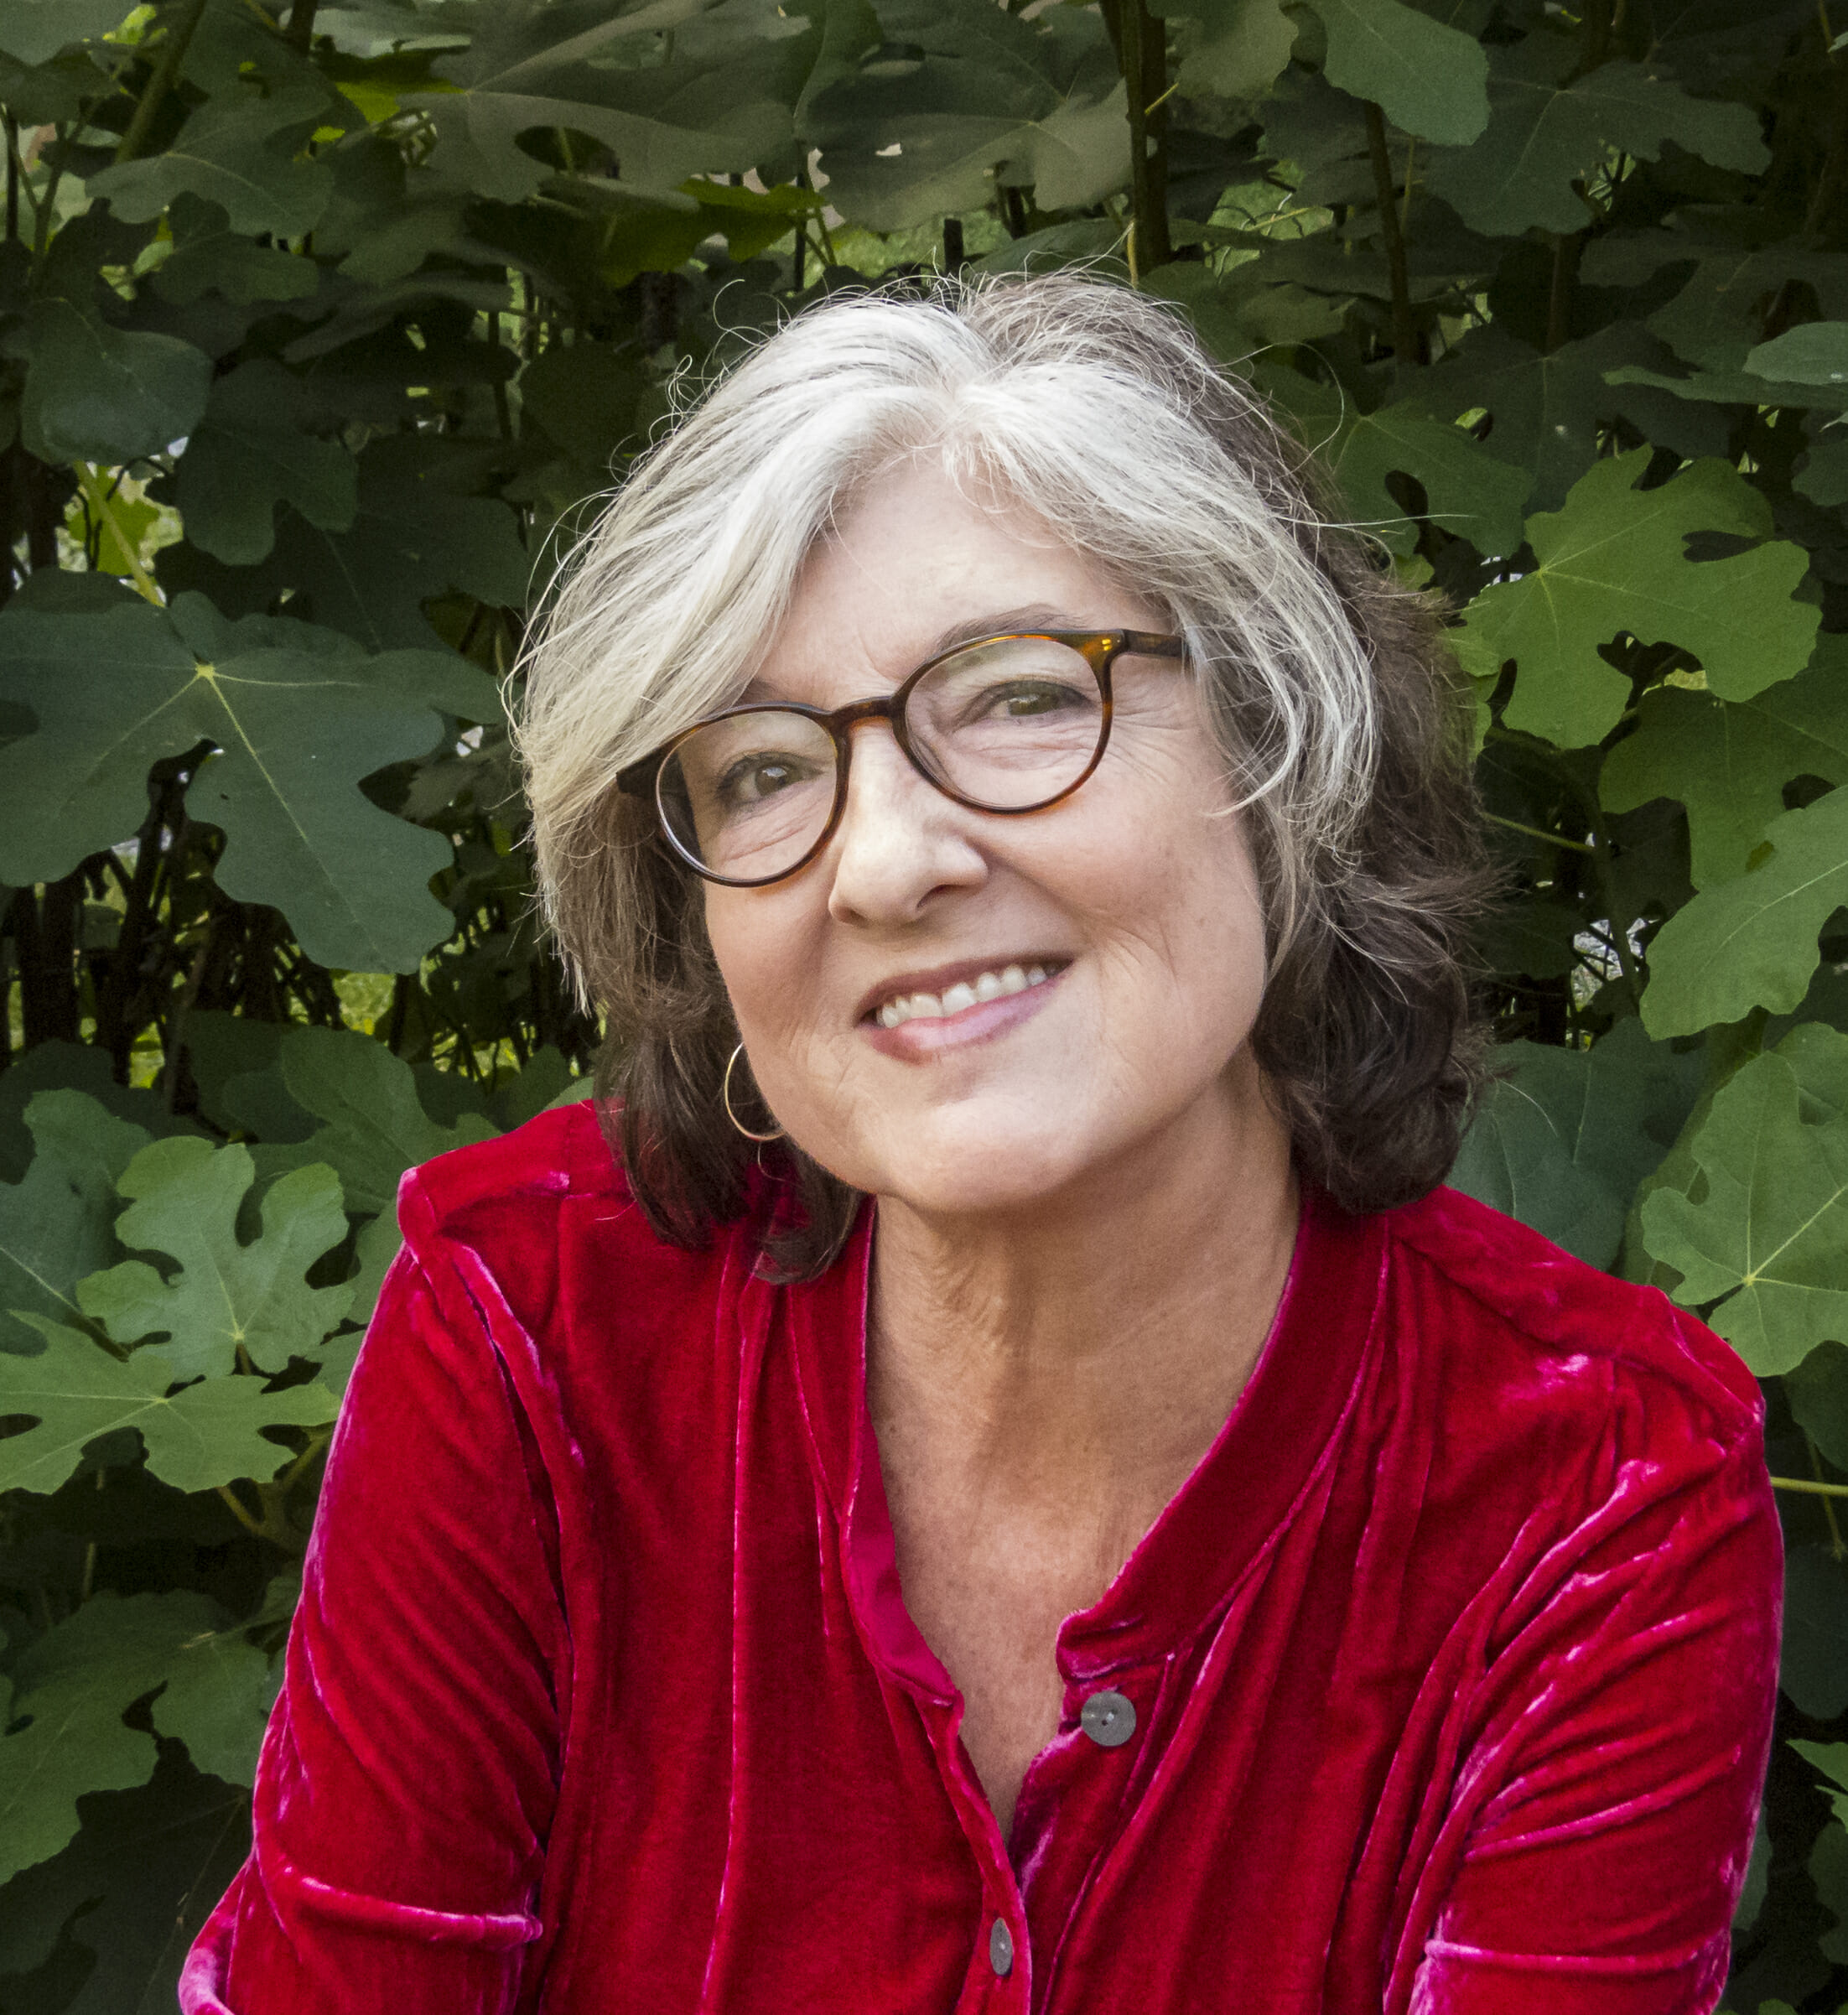 Barbara Kingsolver smiling, looking at the camera, in front of foliage.